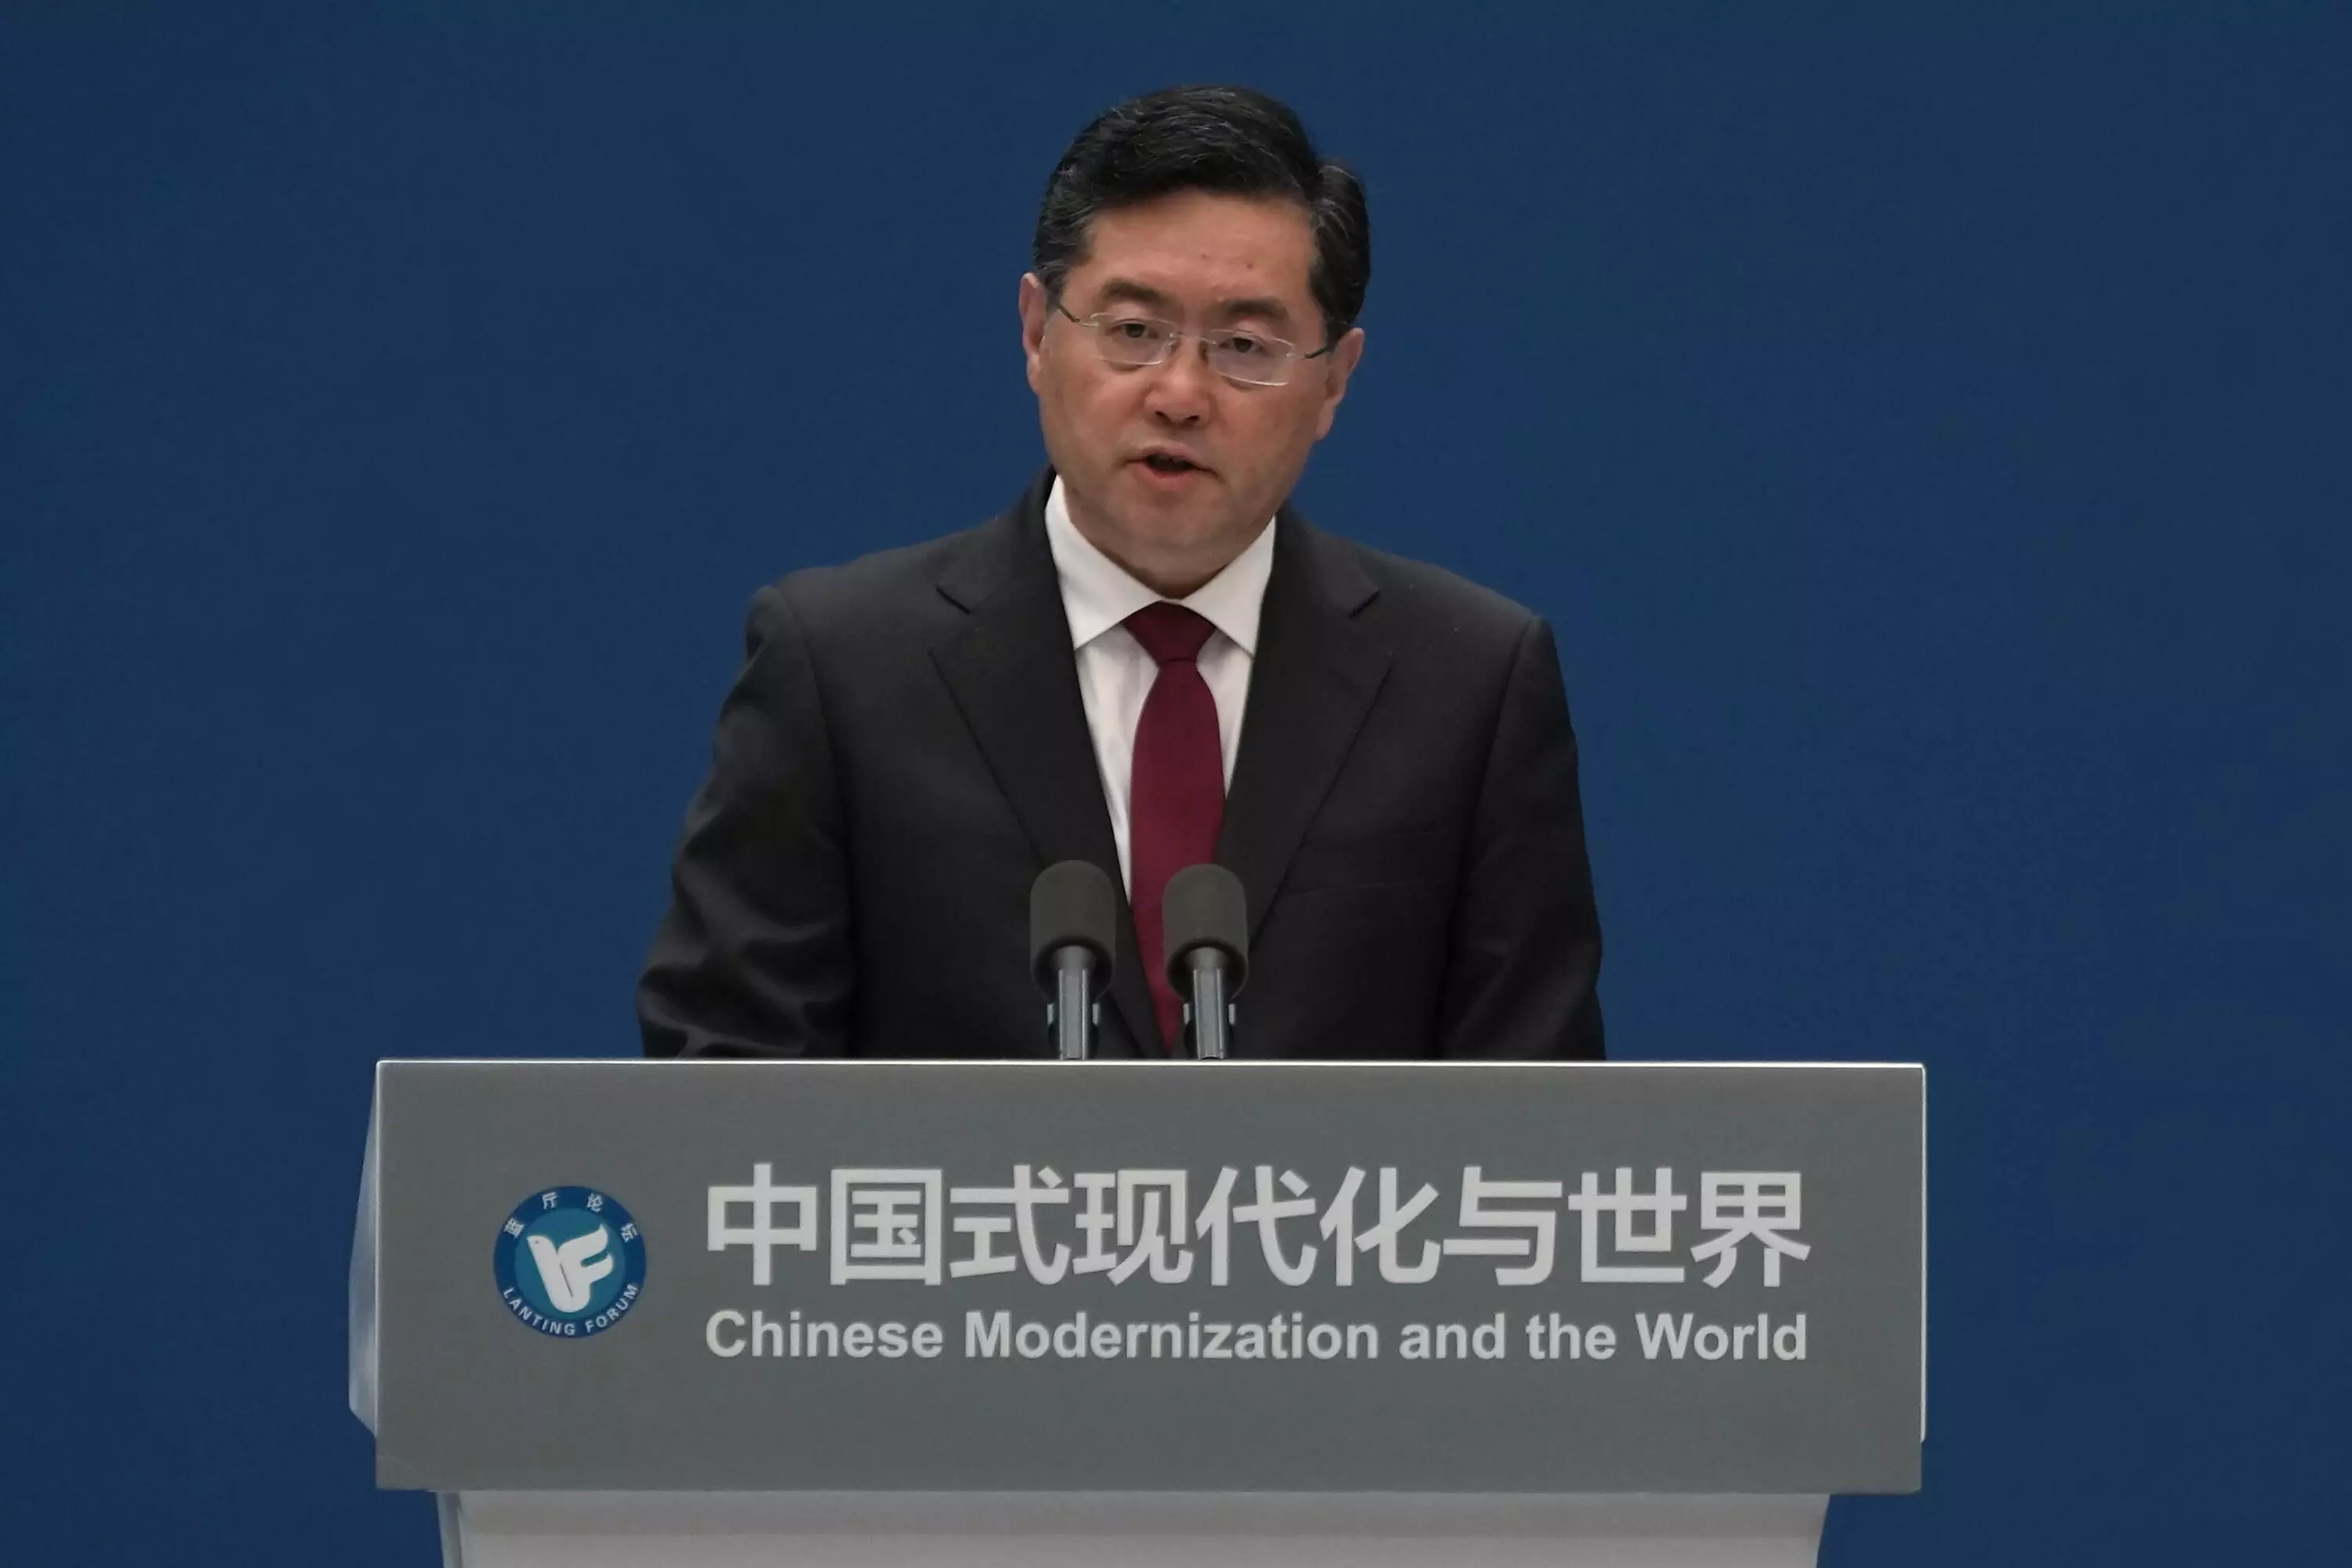 China foreign minister steps up threats against Taiwan